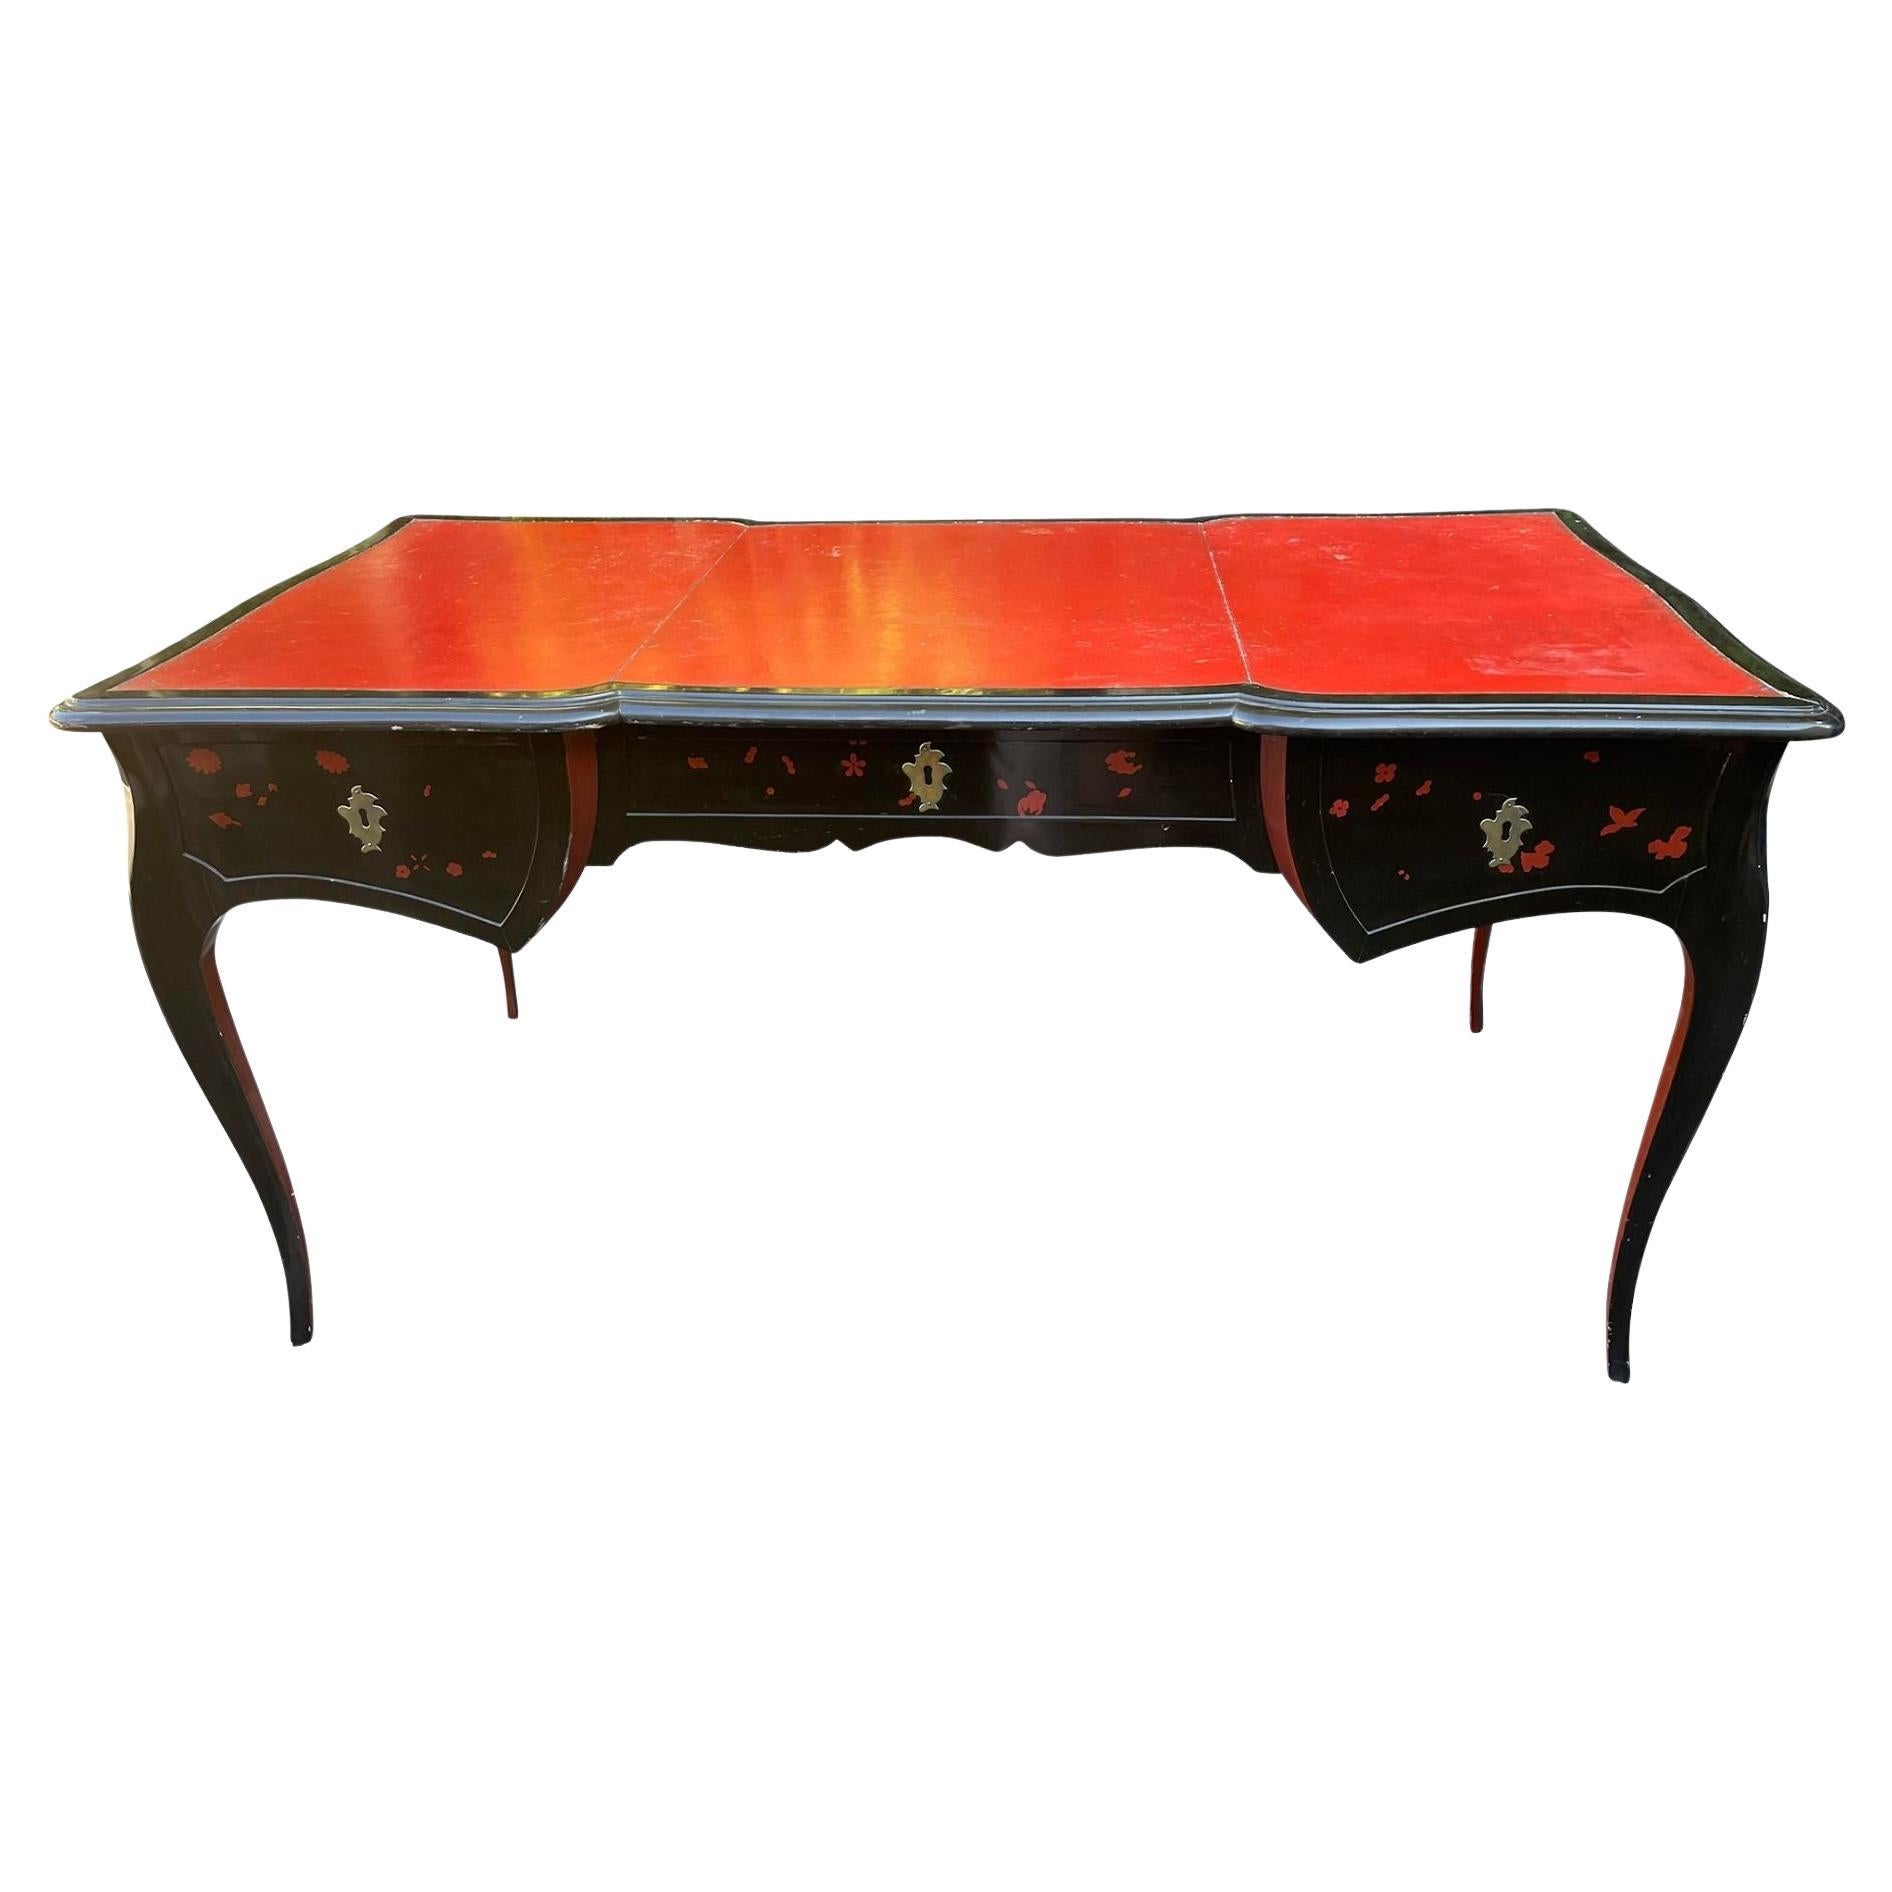 Antique Chinoiserie Black Lacquer Red Leather Bureau Plat Writing Table Desk For Sale